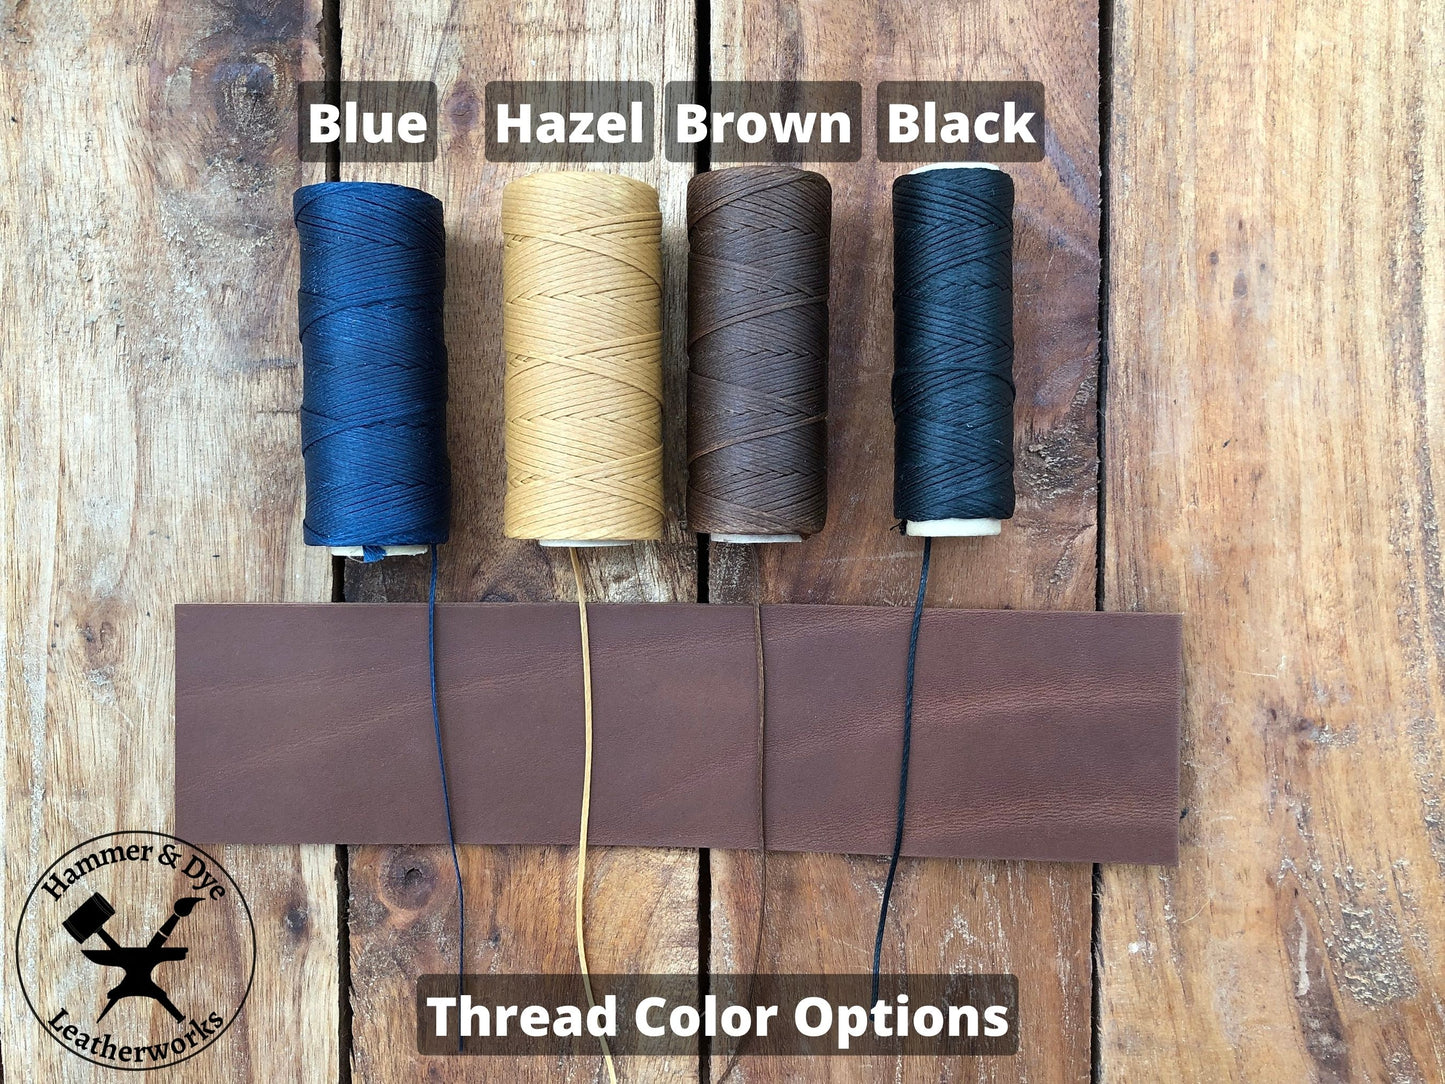 Thread color choices for the Handmade Brown Bifold Leather Card Wallet